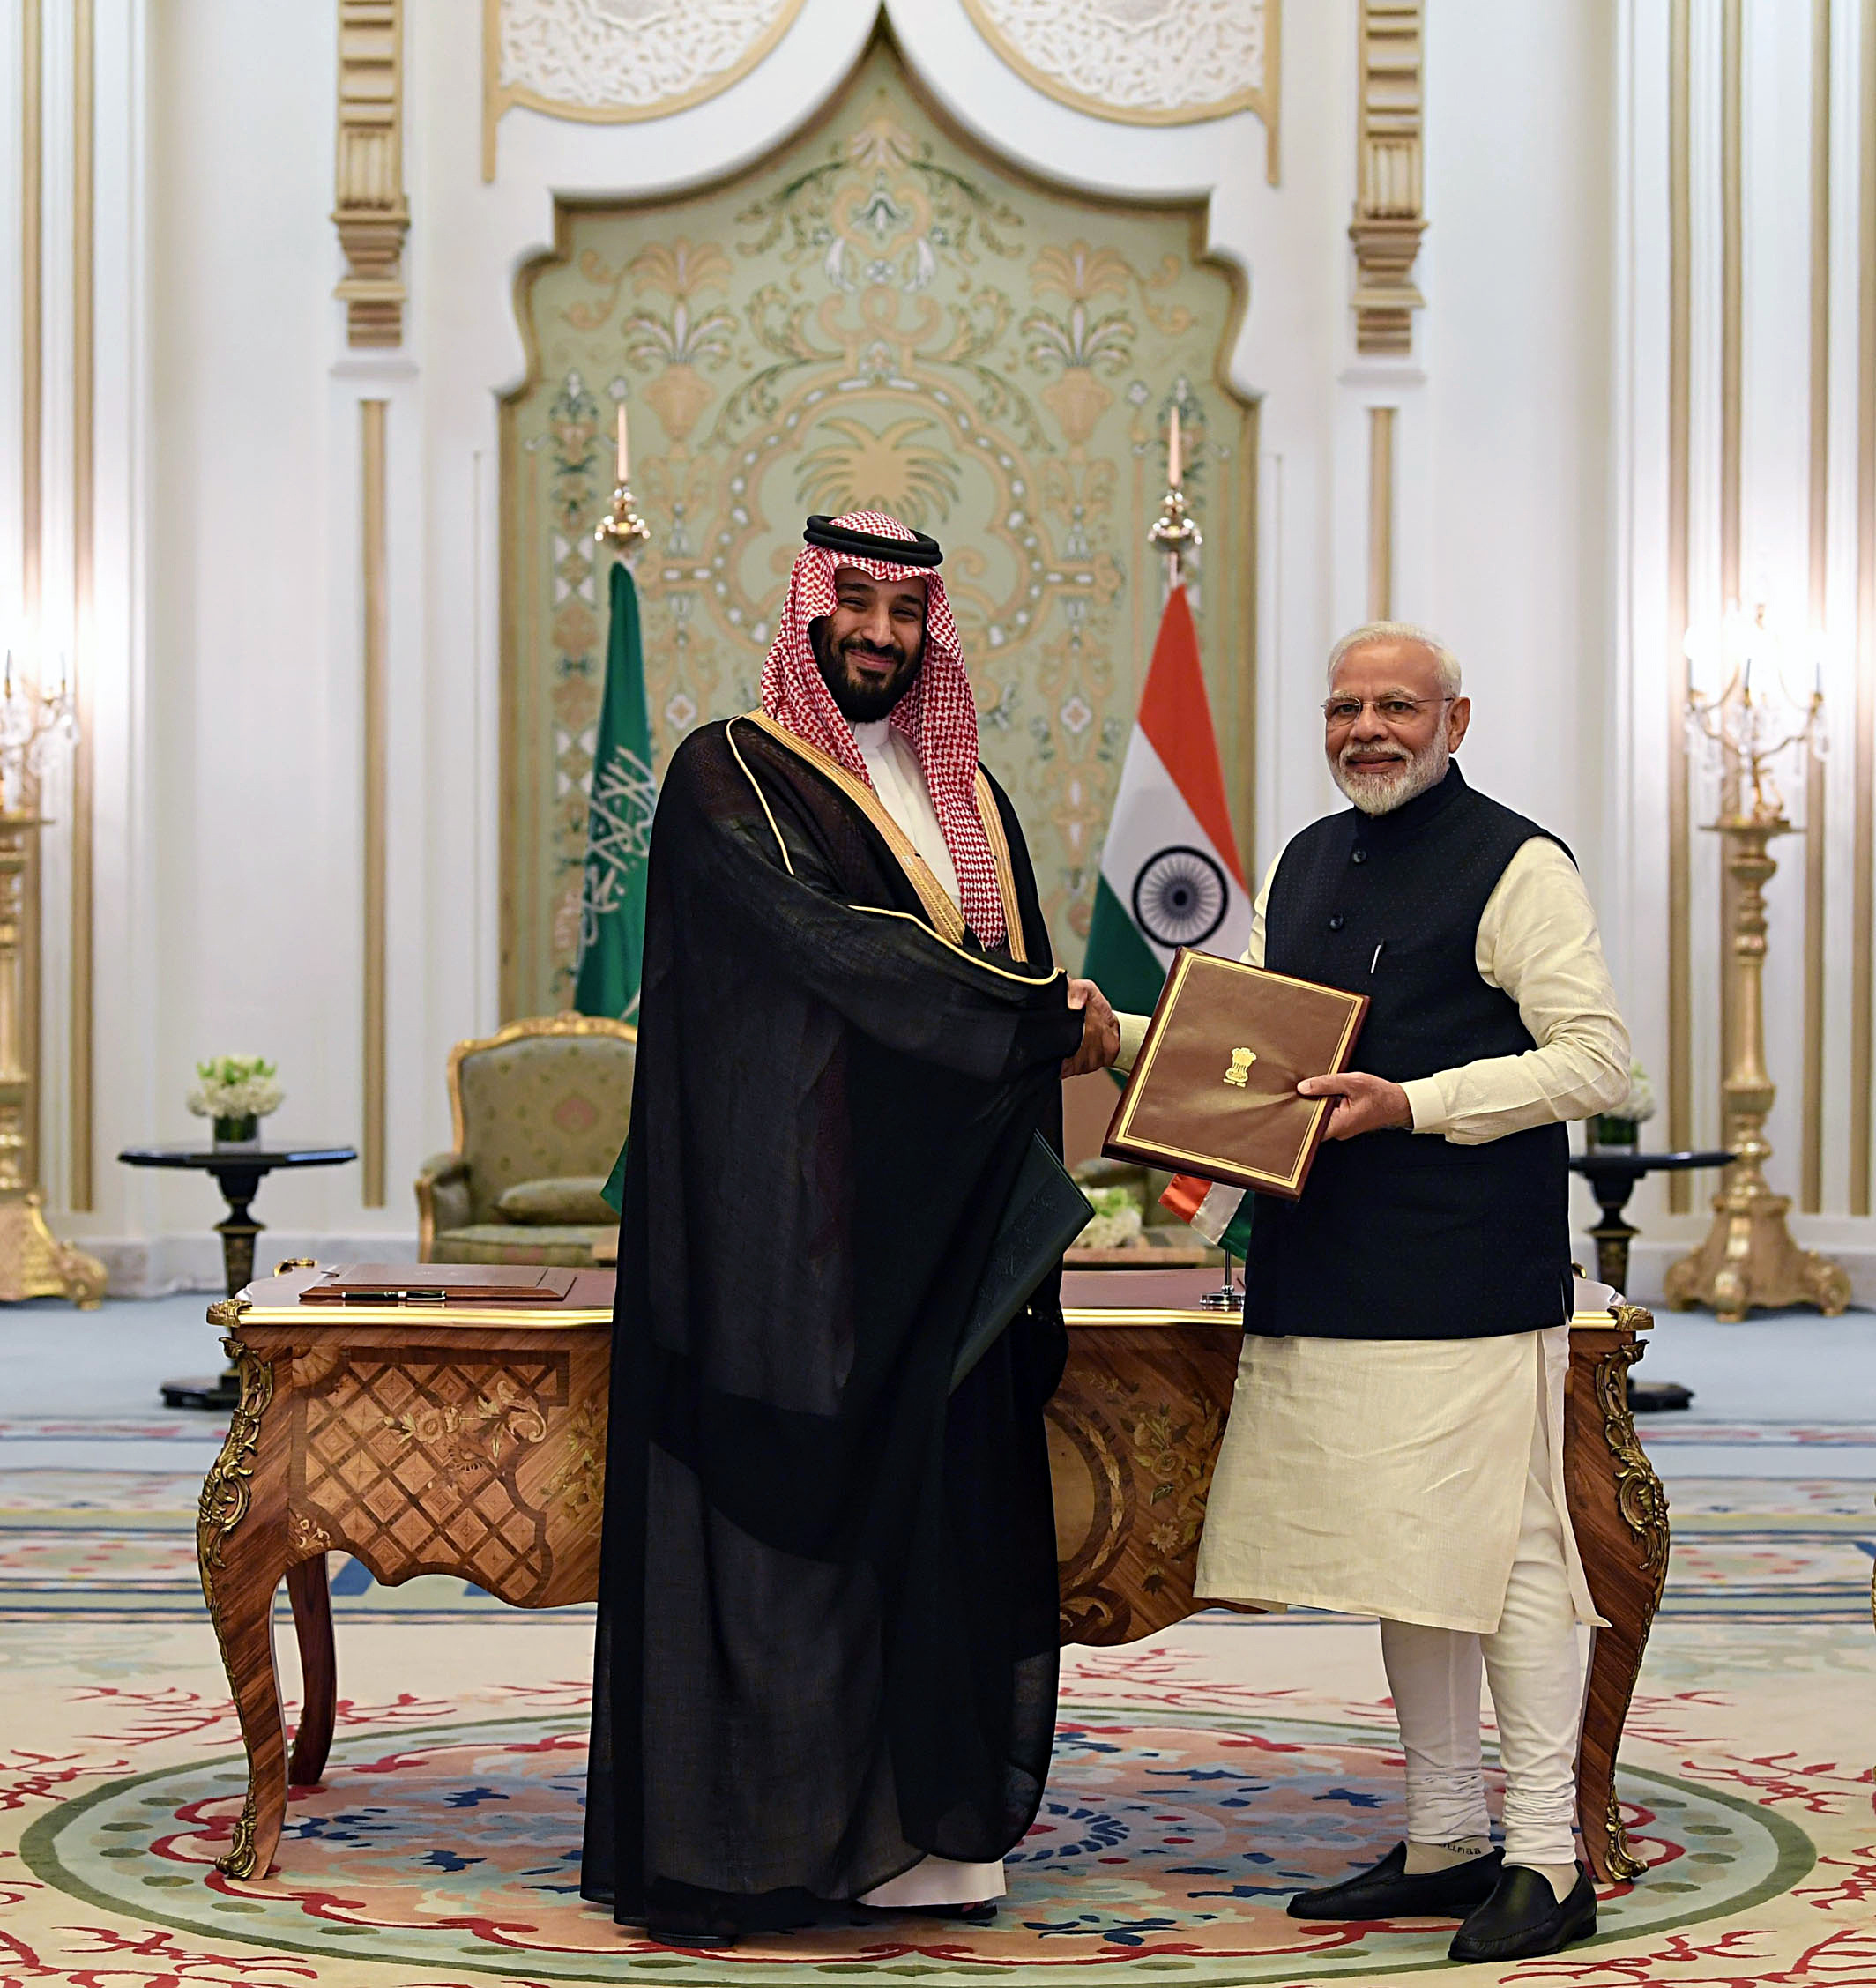 Saudi PM Mohammed bin Salman’s India visit to focus on trade, investments